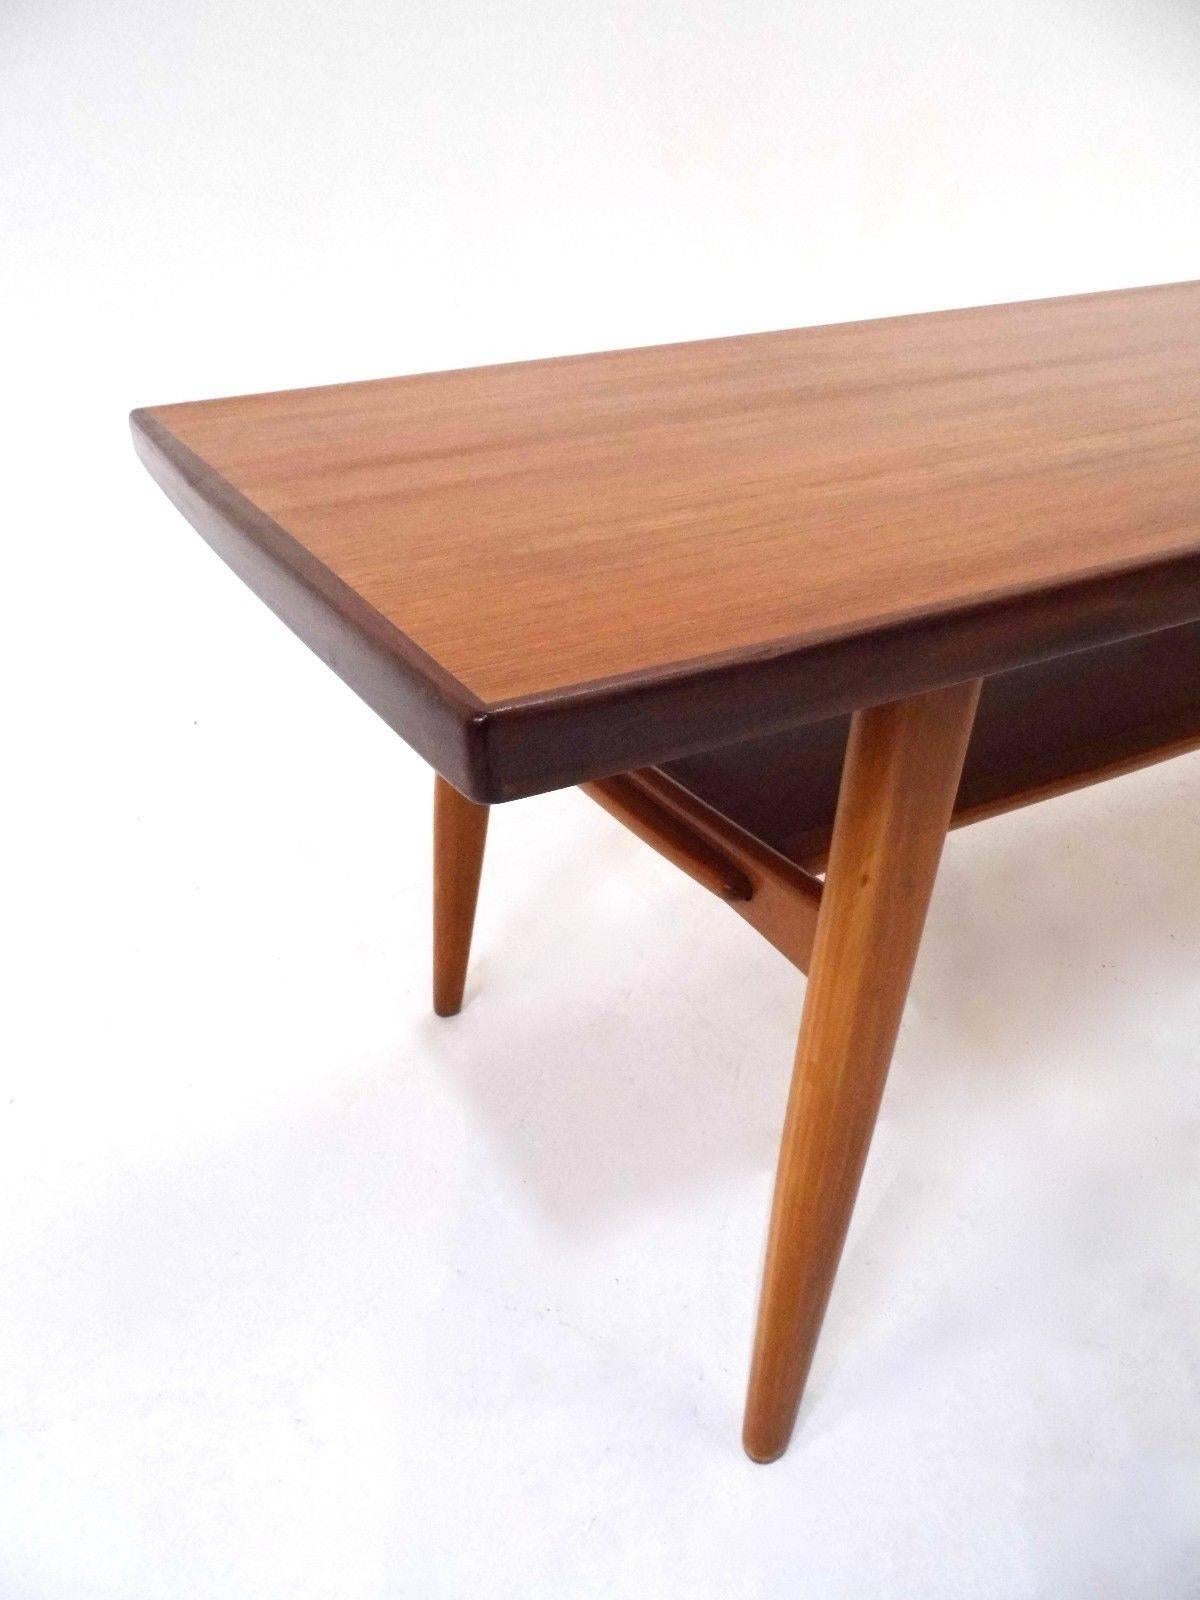 A beautiful Norwegian teak coffee table, this would make a stylish addition to any living area. The table has a storage shelf and cross grain bordering. A striking piece of classically designed Scandinavian furniture.

The table is in excellent